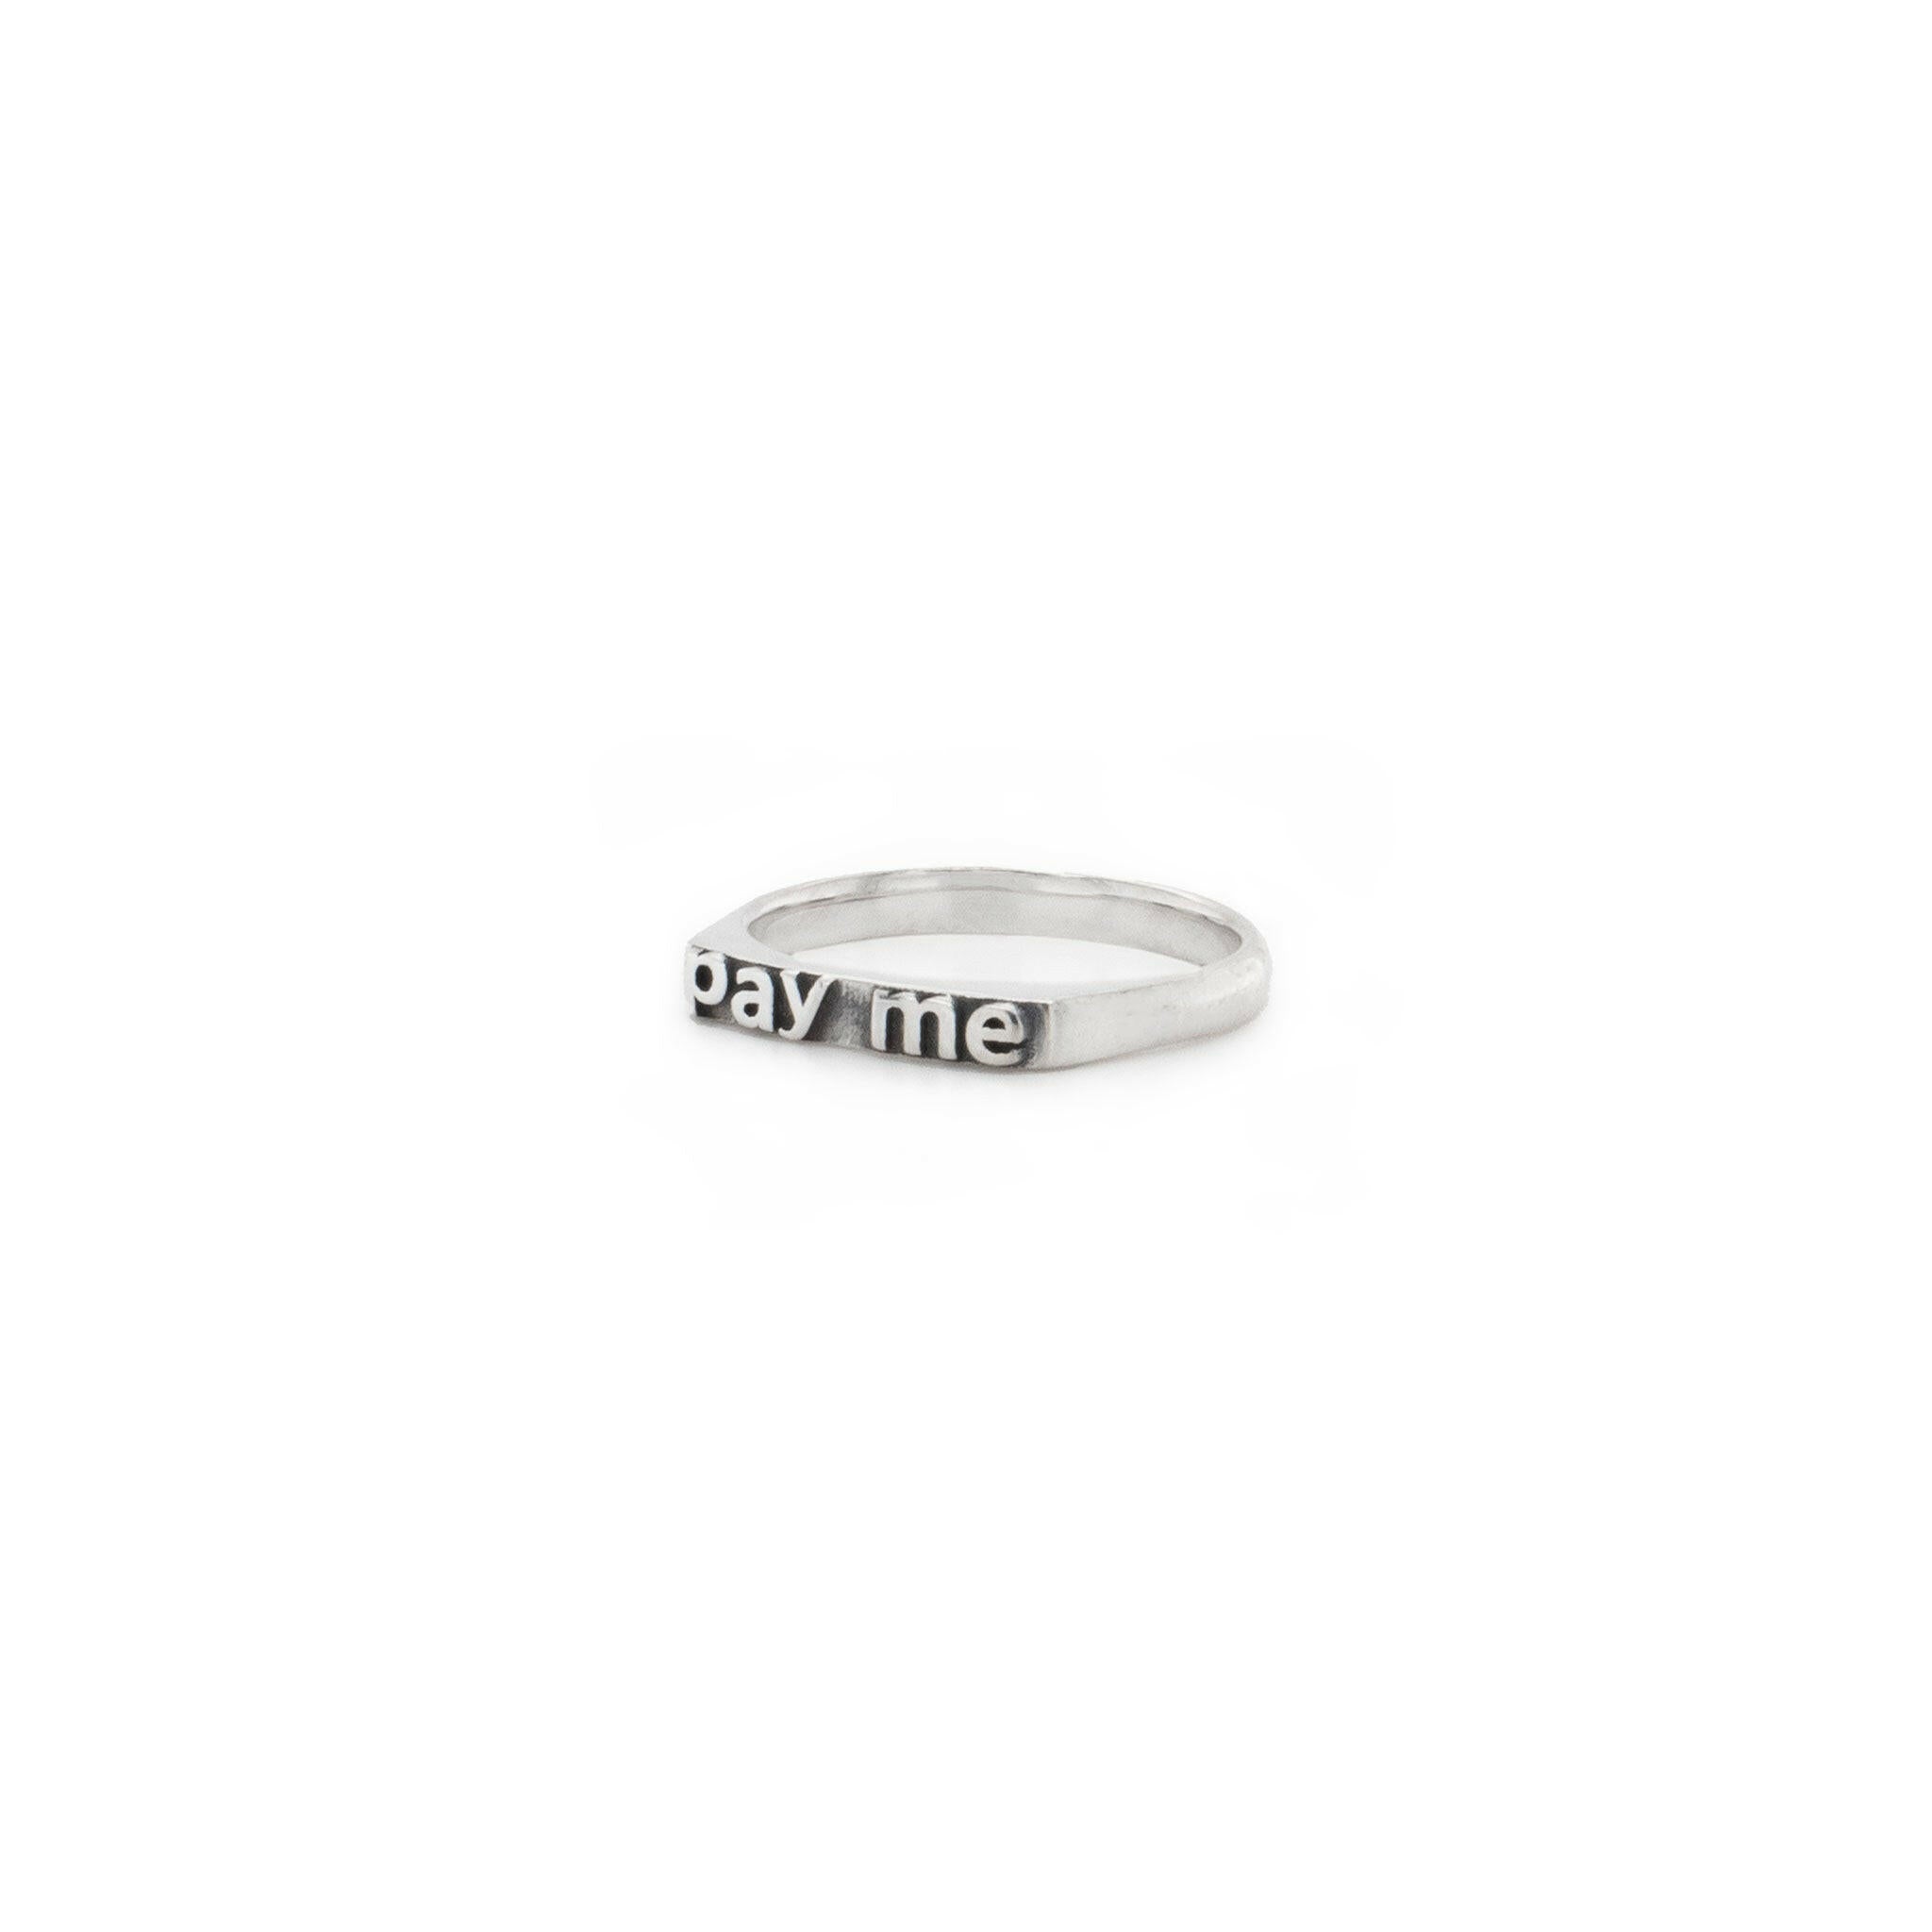 slightly right angled ring with texts that reads "pay me"